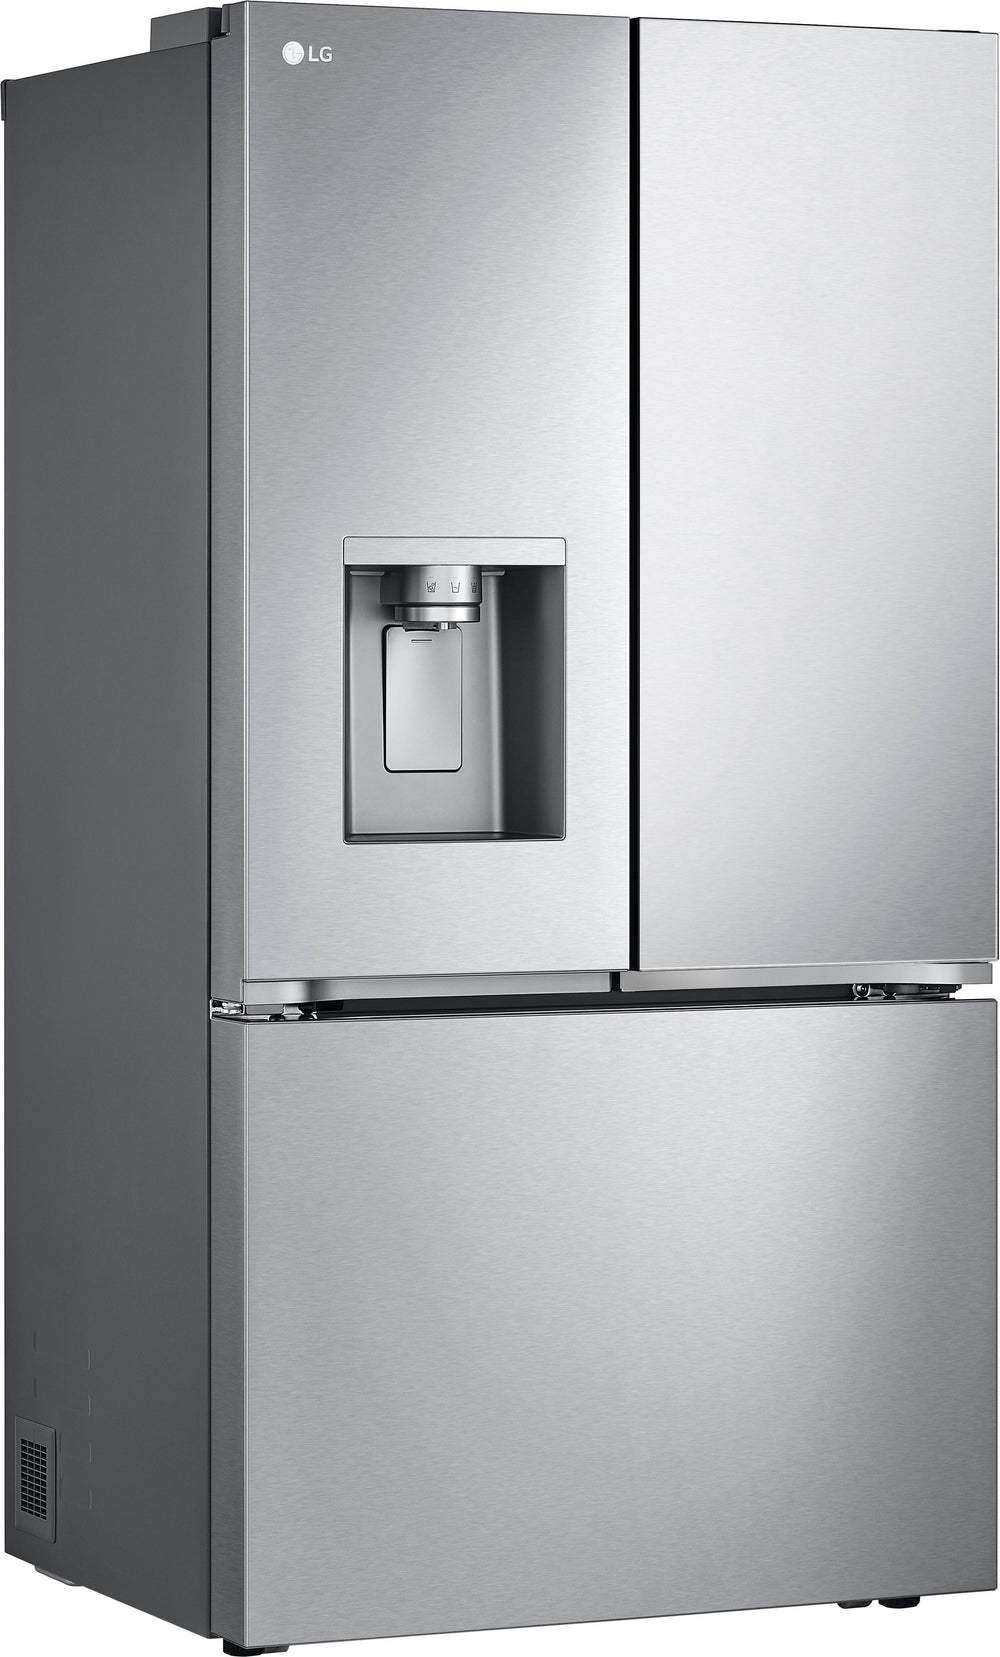 LG - 30.7 Cu. Ft. French Door Counter-Depth Smart Refrigerator with Tall Ice and Water Dispenser - Stainless Steel_1